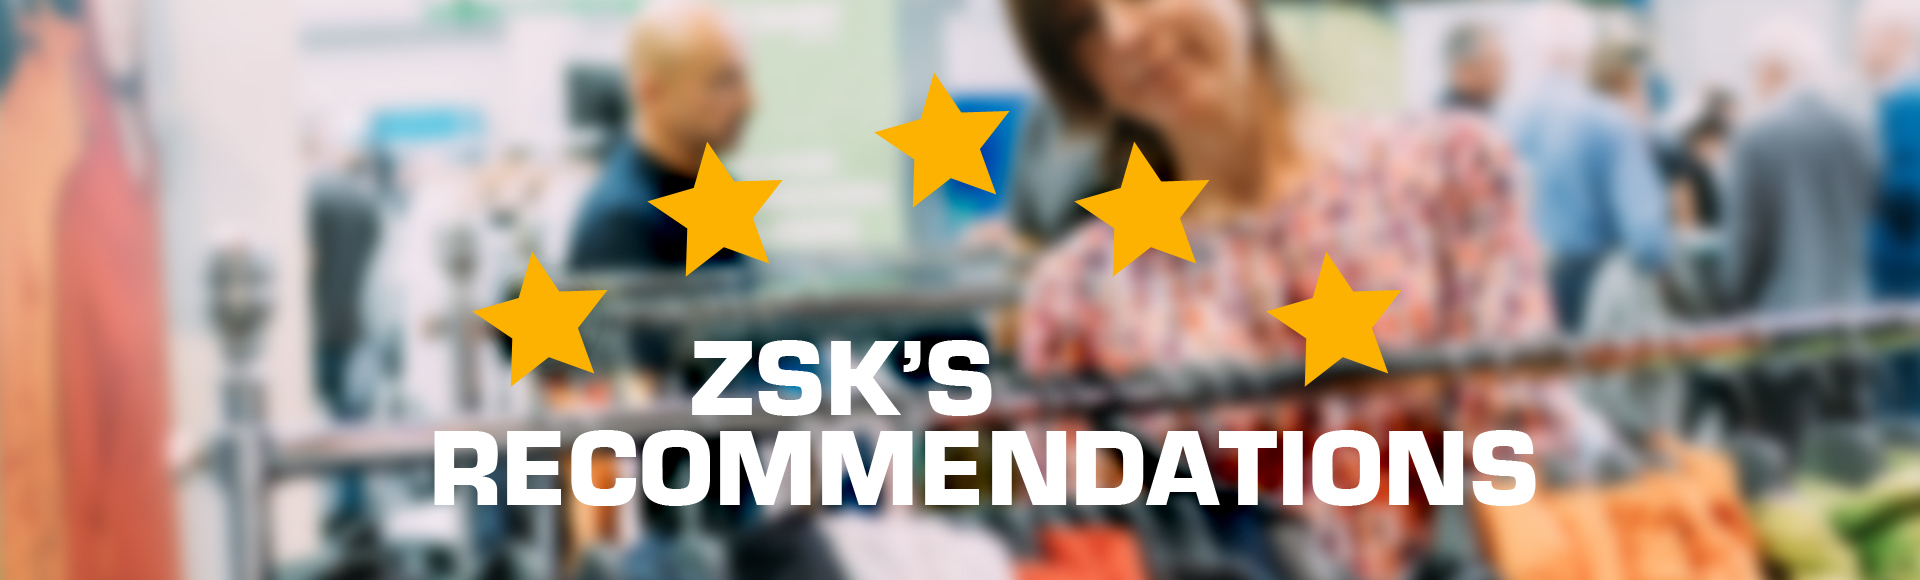 ZSK STICKMASCHINEN - Our recommendations for products and services related to embroidery